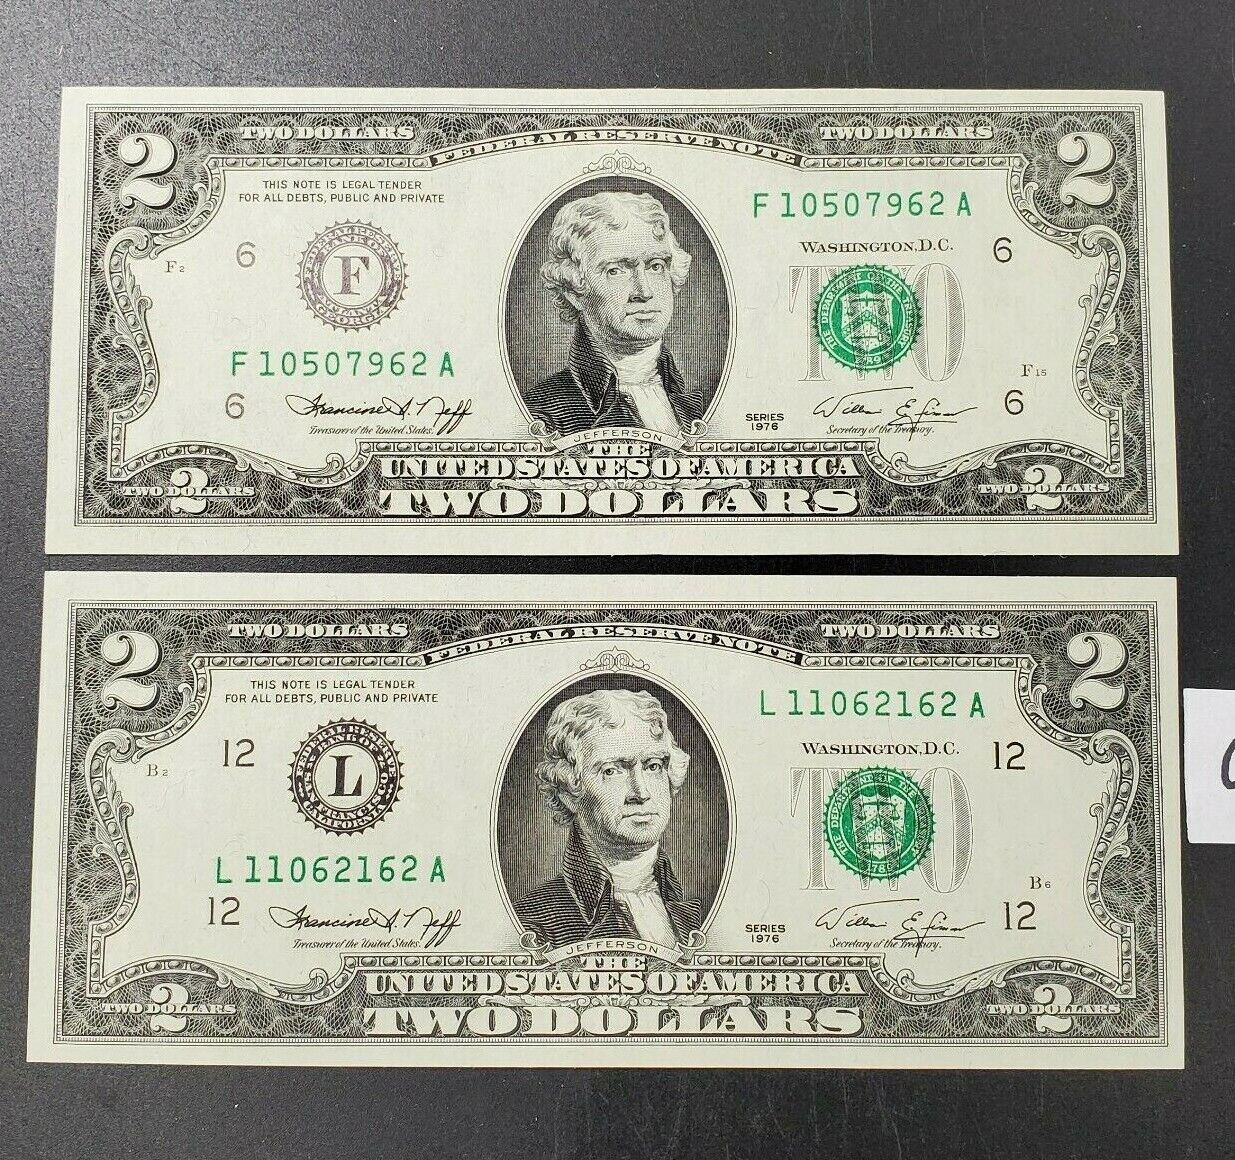 Lot of 2 1976 $2 FRN Federal Reserve Note Bicentennial CH UNC Note Different LTR